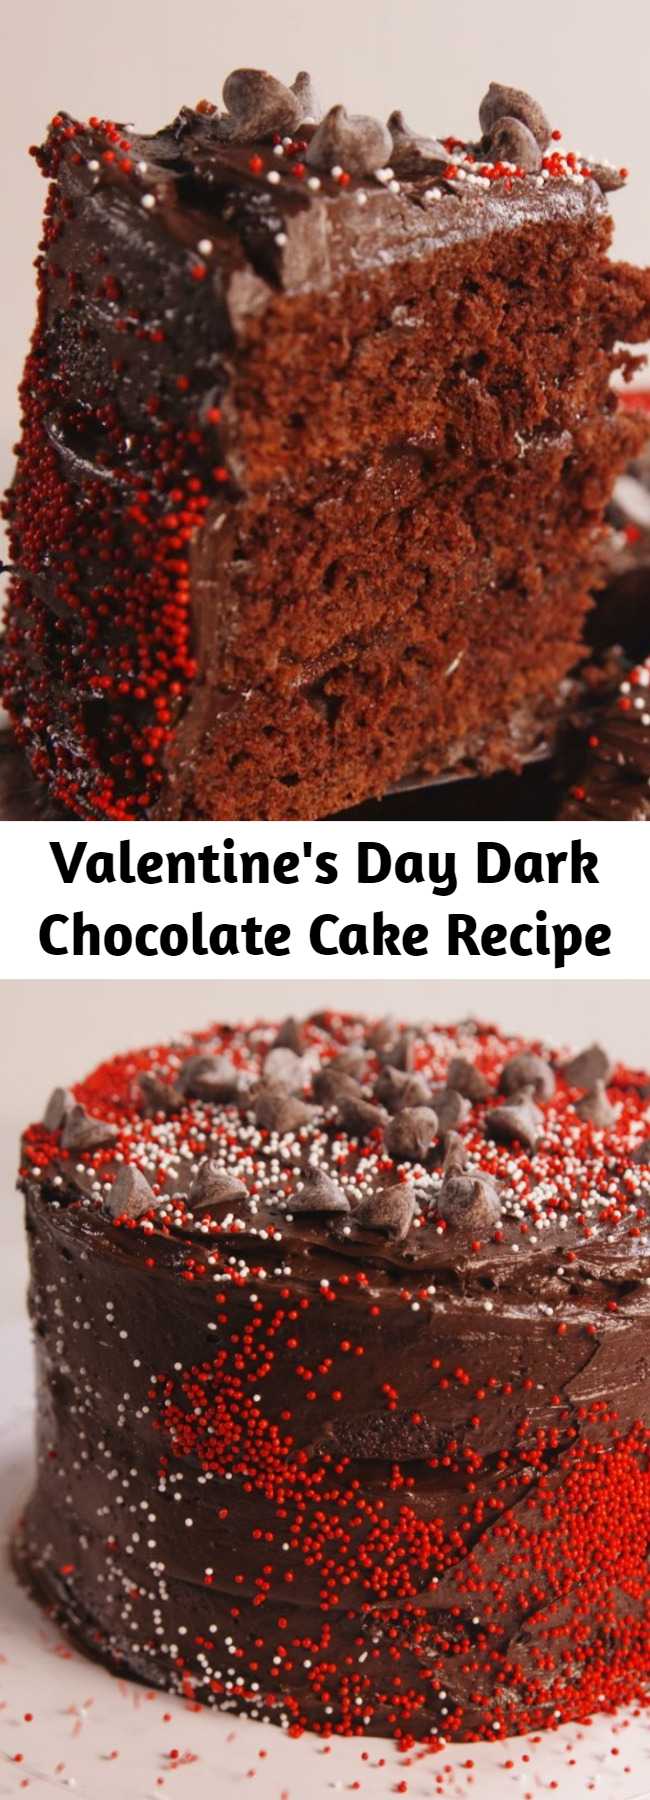 Valentine's Day Dark Chocolate Cake Recipe - Really impress your sweetheart this year.